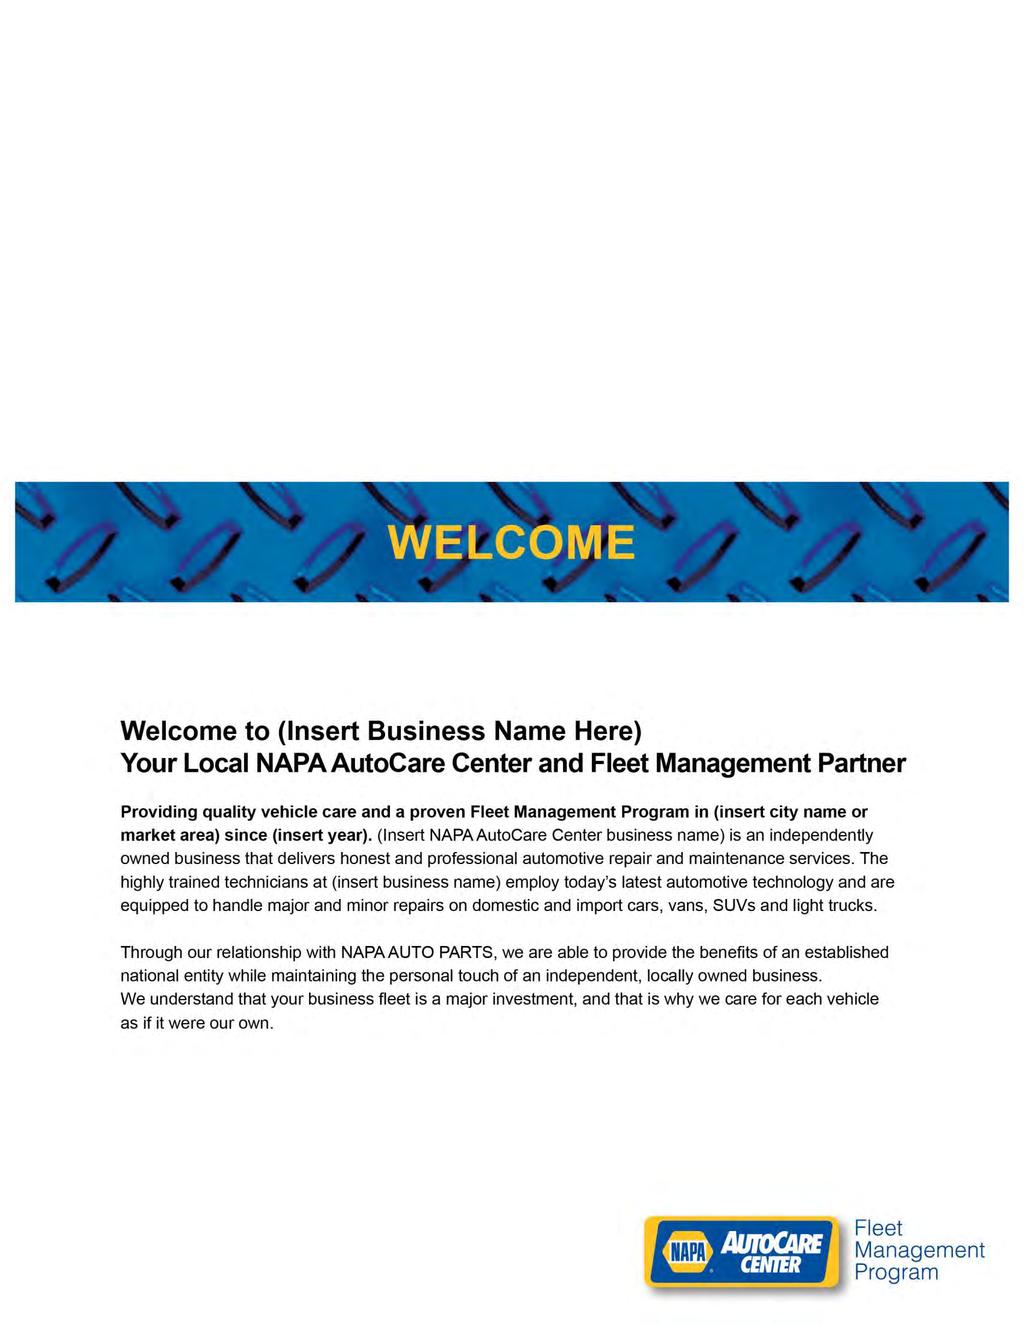 Welcome to Your Local NAPA AutoCare Center and Fleet Management Partner Providing quality vehicle care and a proven Fleet Management Program in Sandy Utah since 1981.